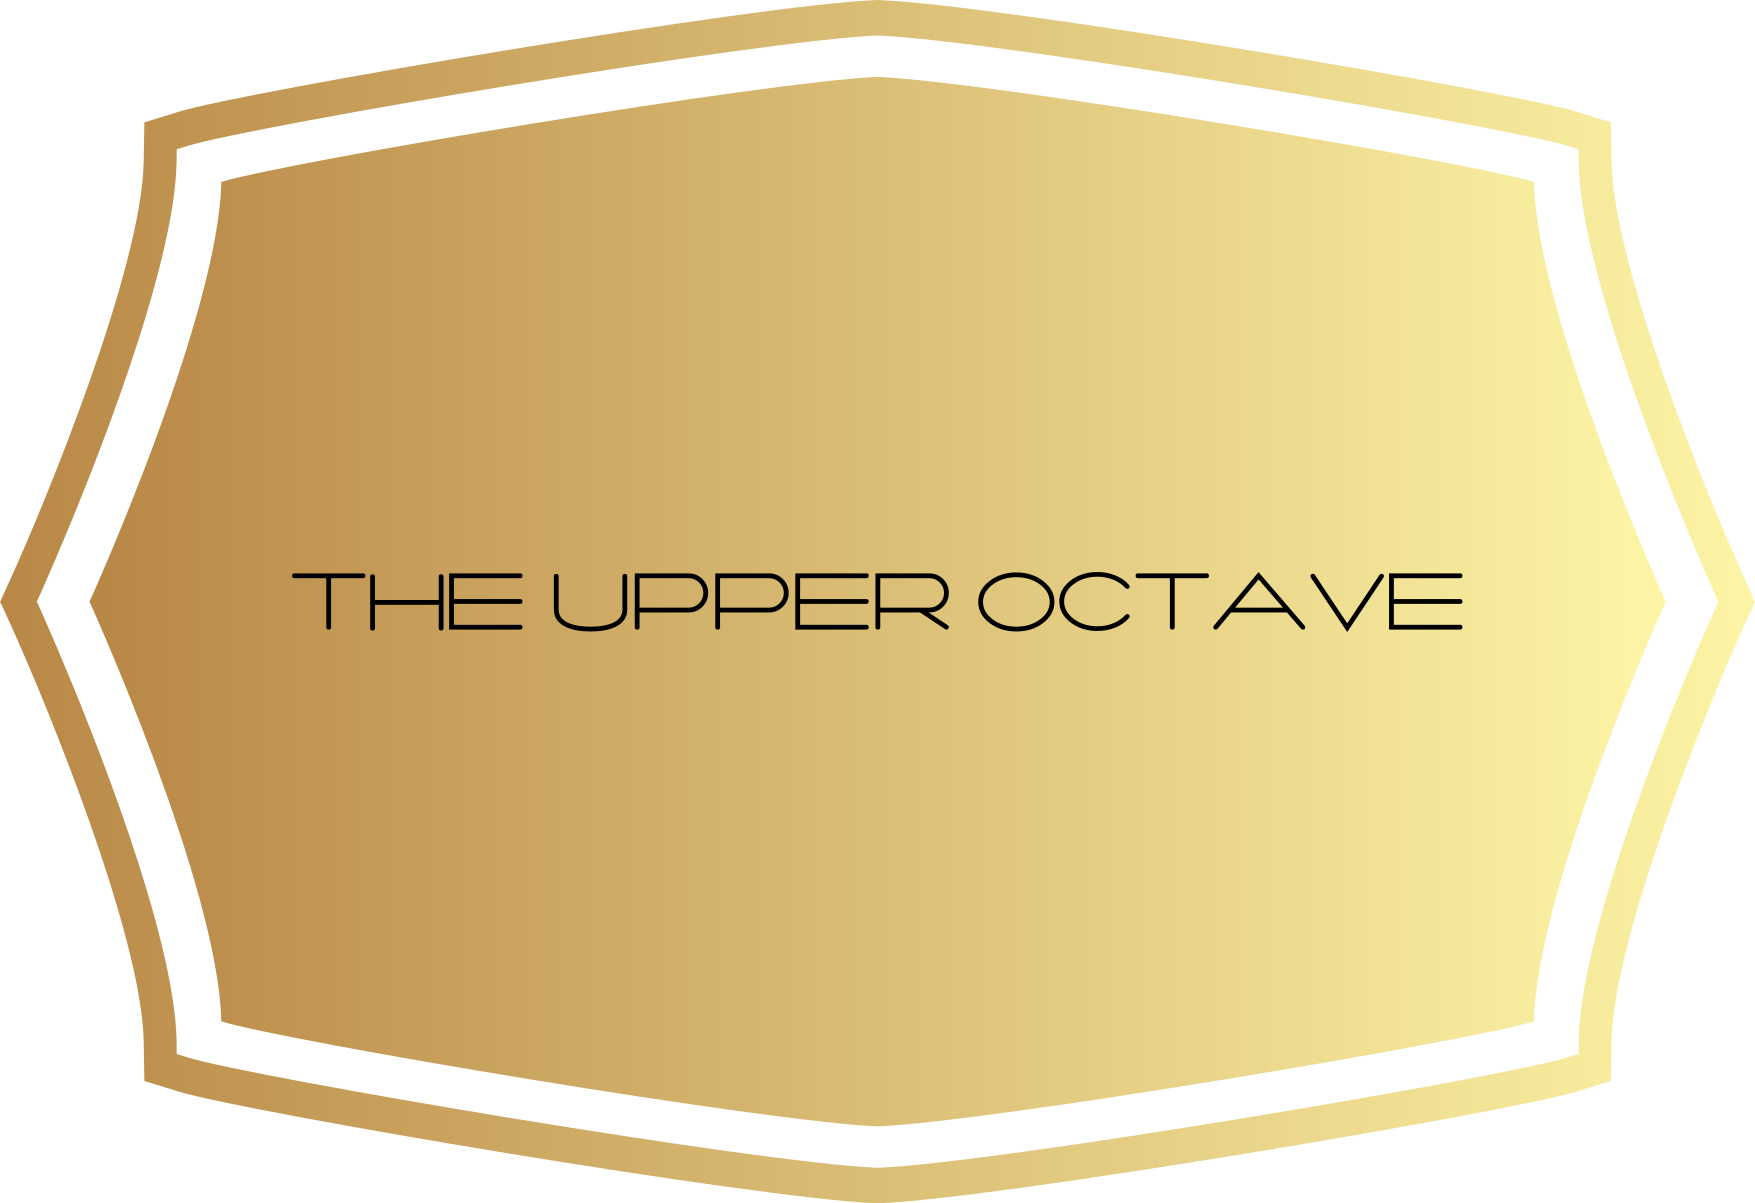 The Upper Octave